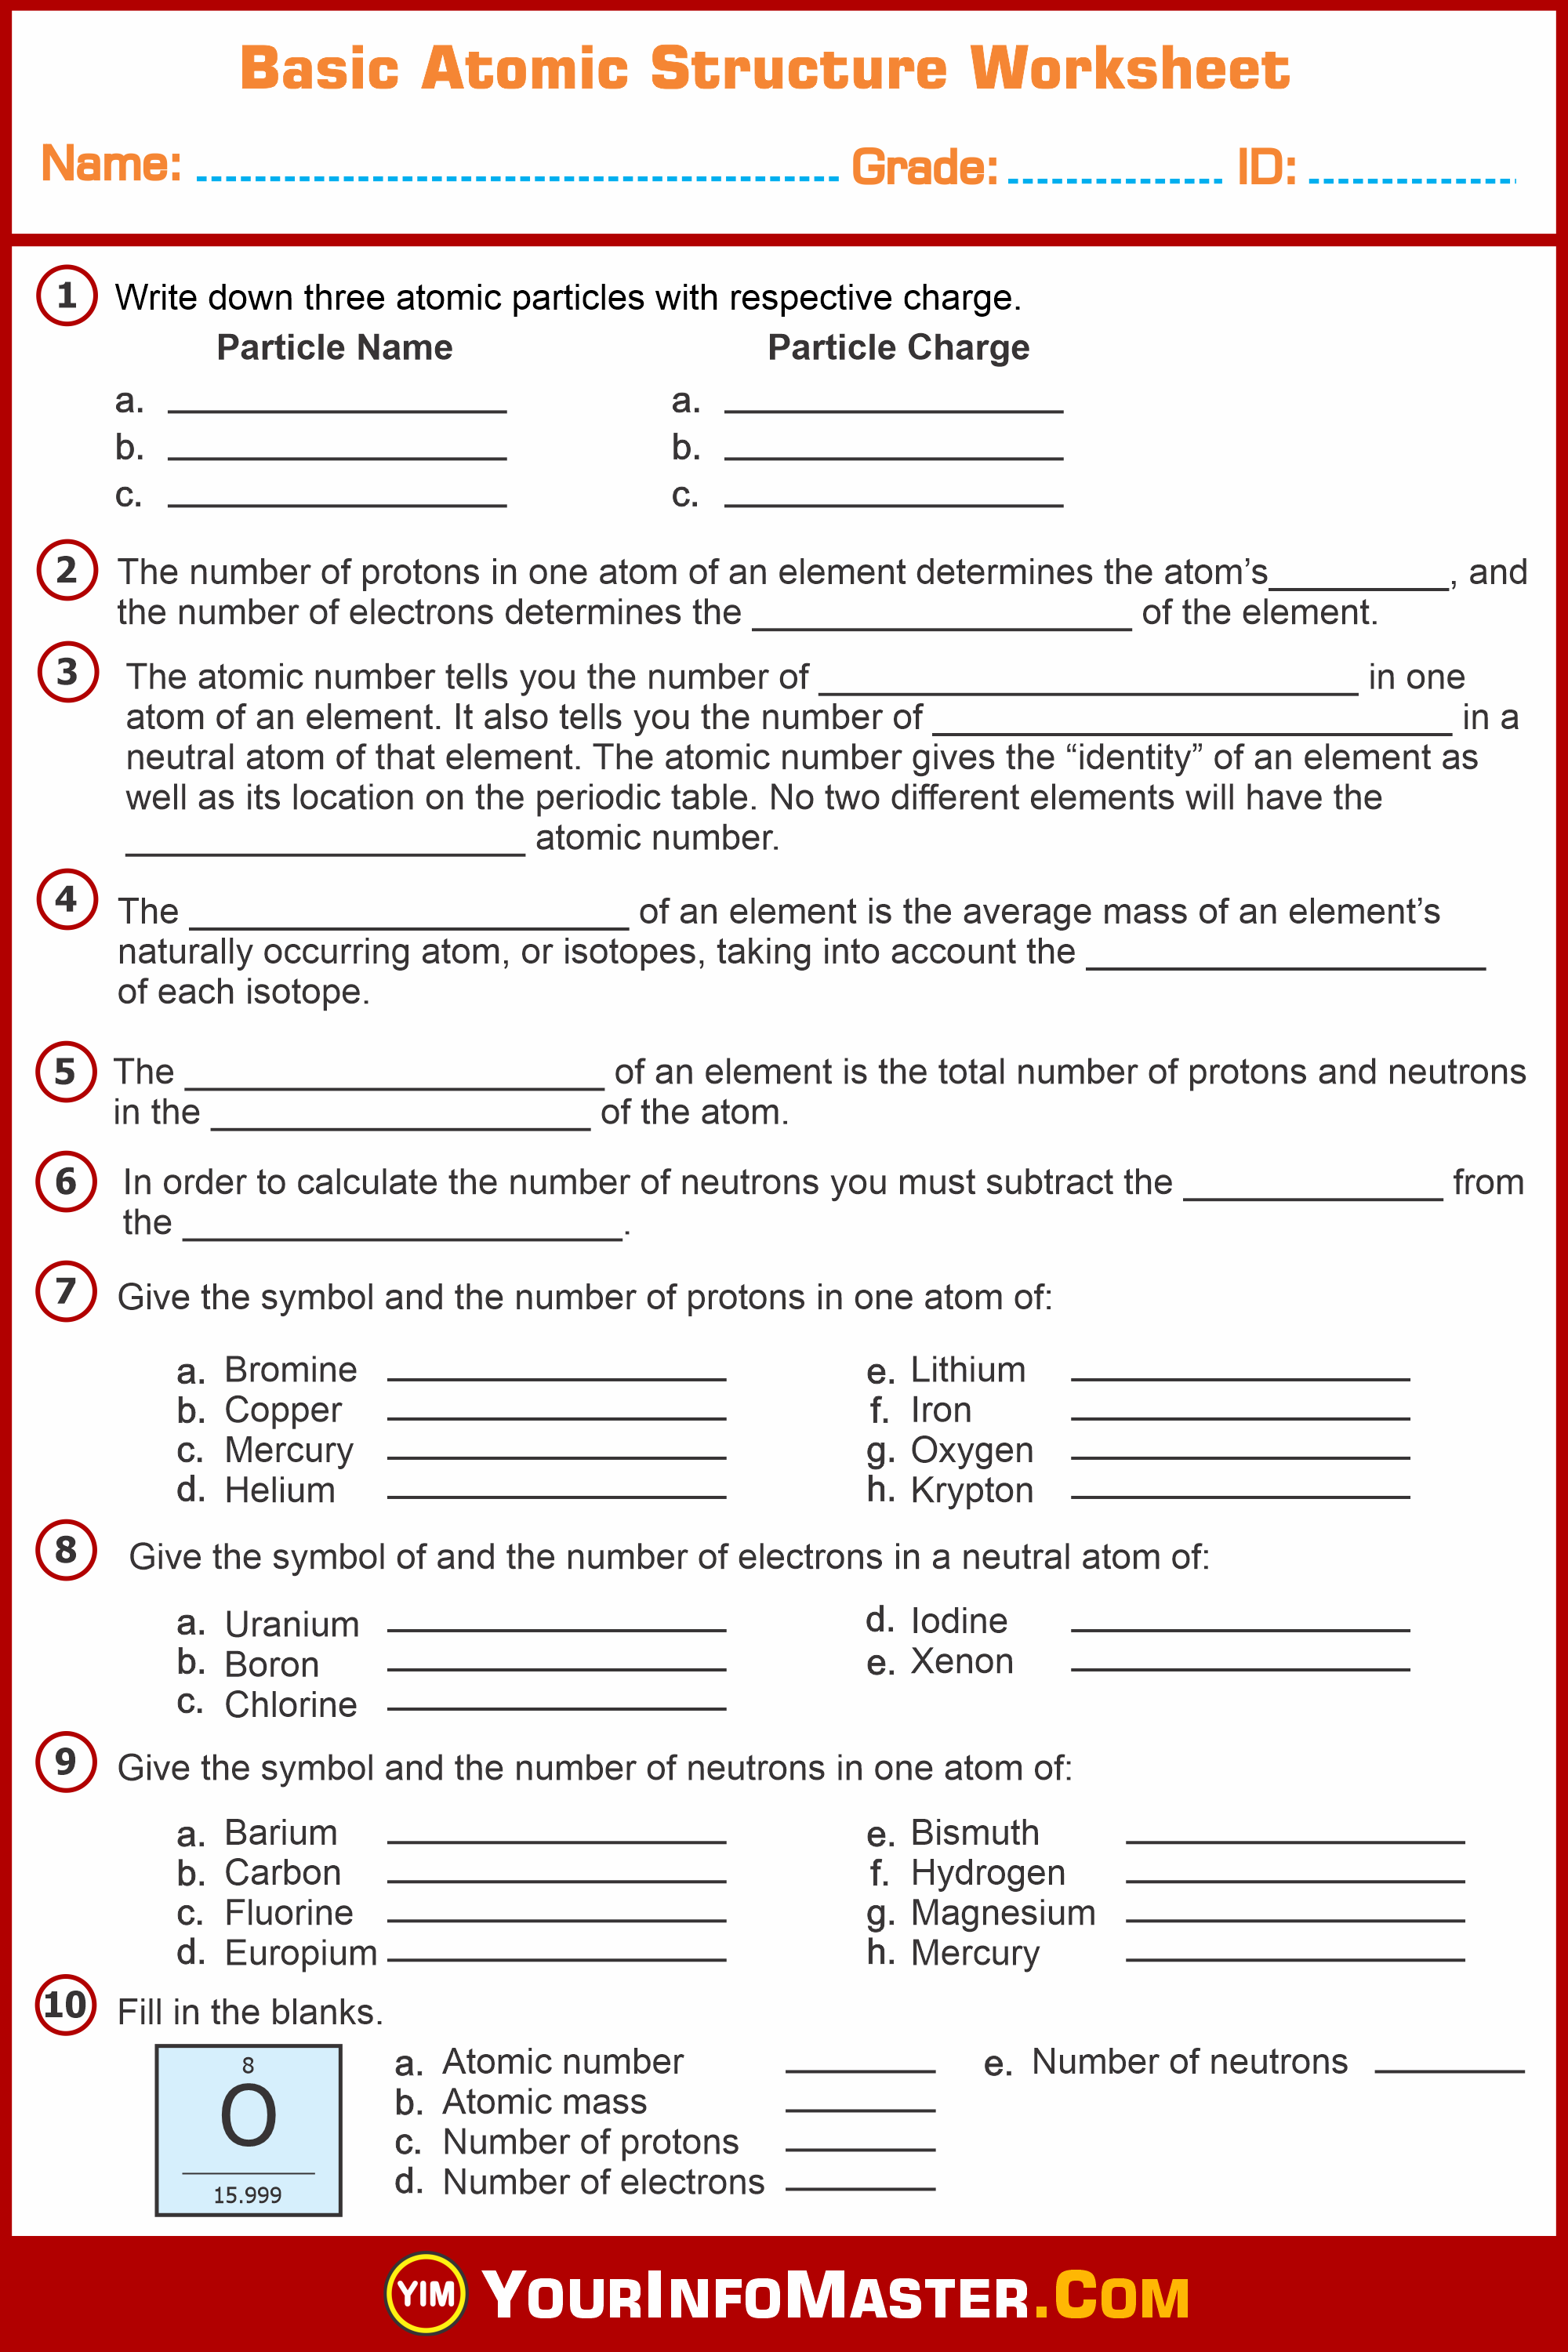 Basic Atomic Structure Worksheet - Your Info Master Inside Atomic Structure Worksheet Pdf